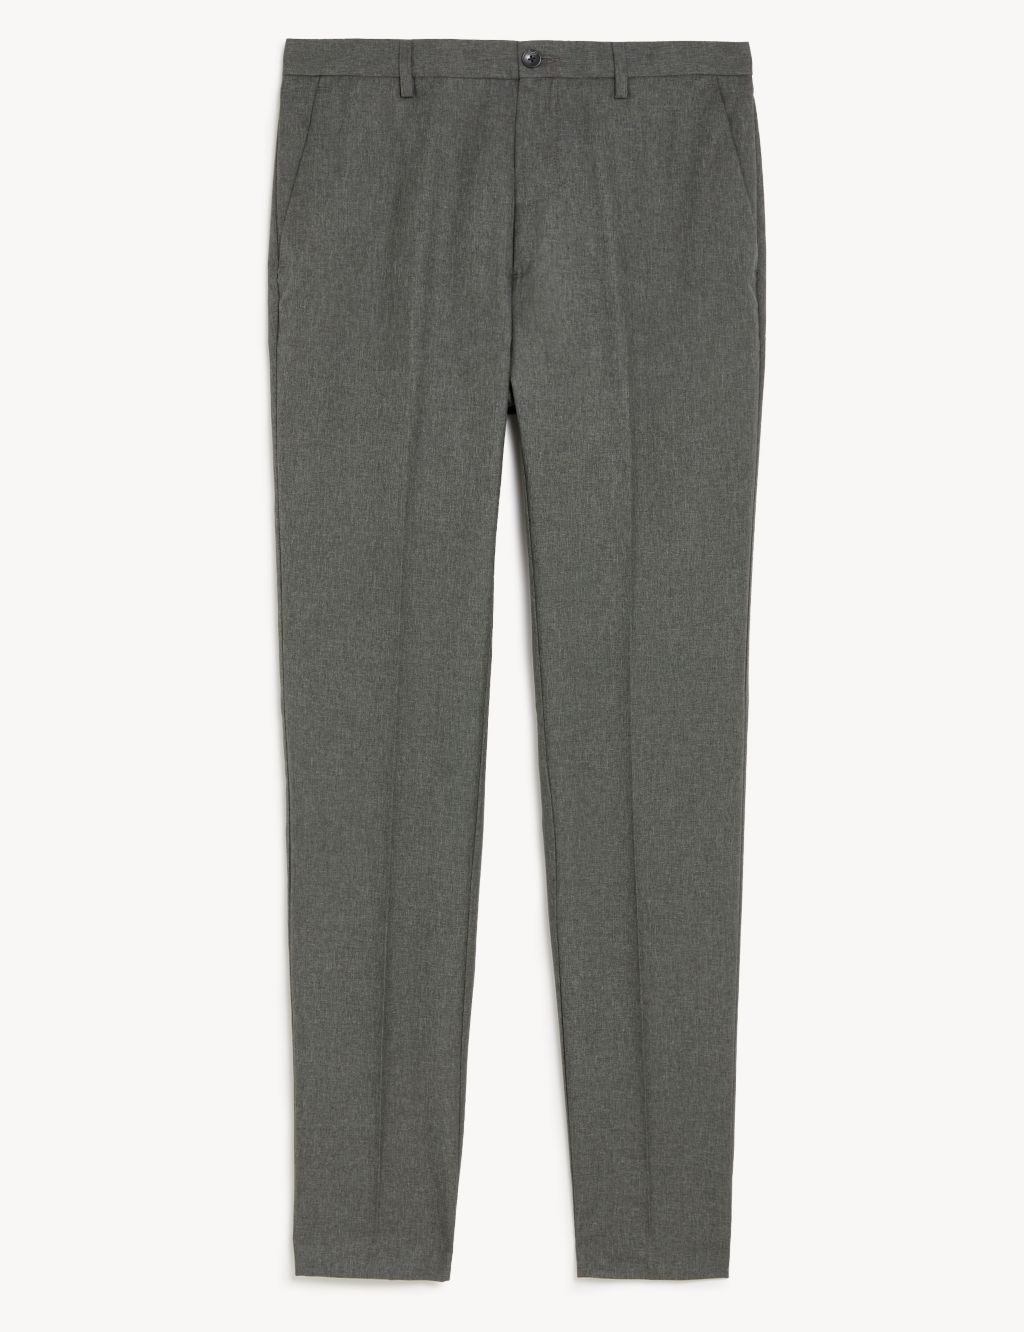 Skinny Fit Trousers image 8